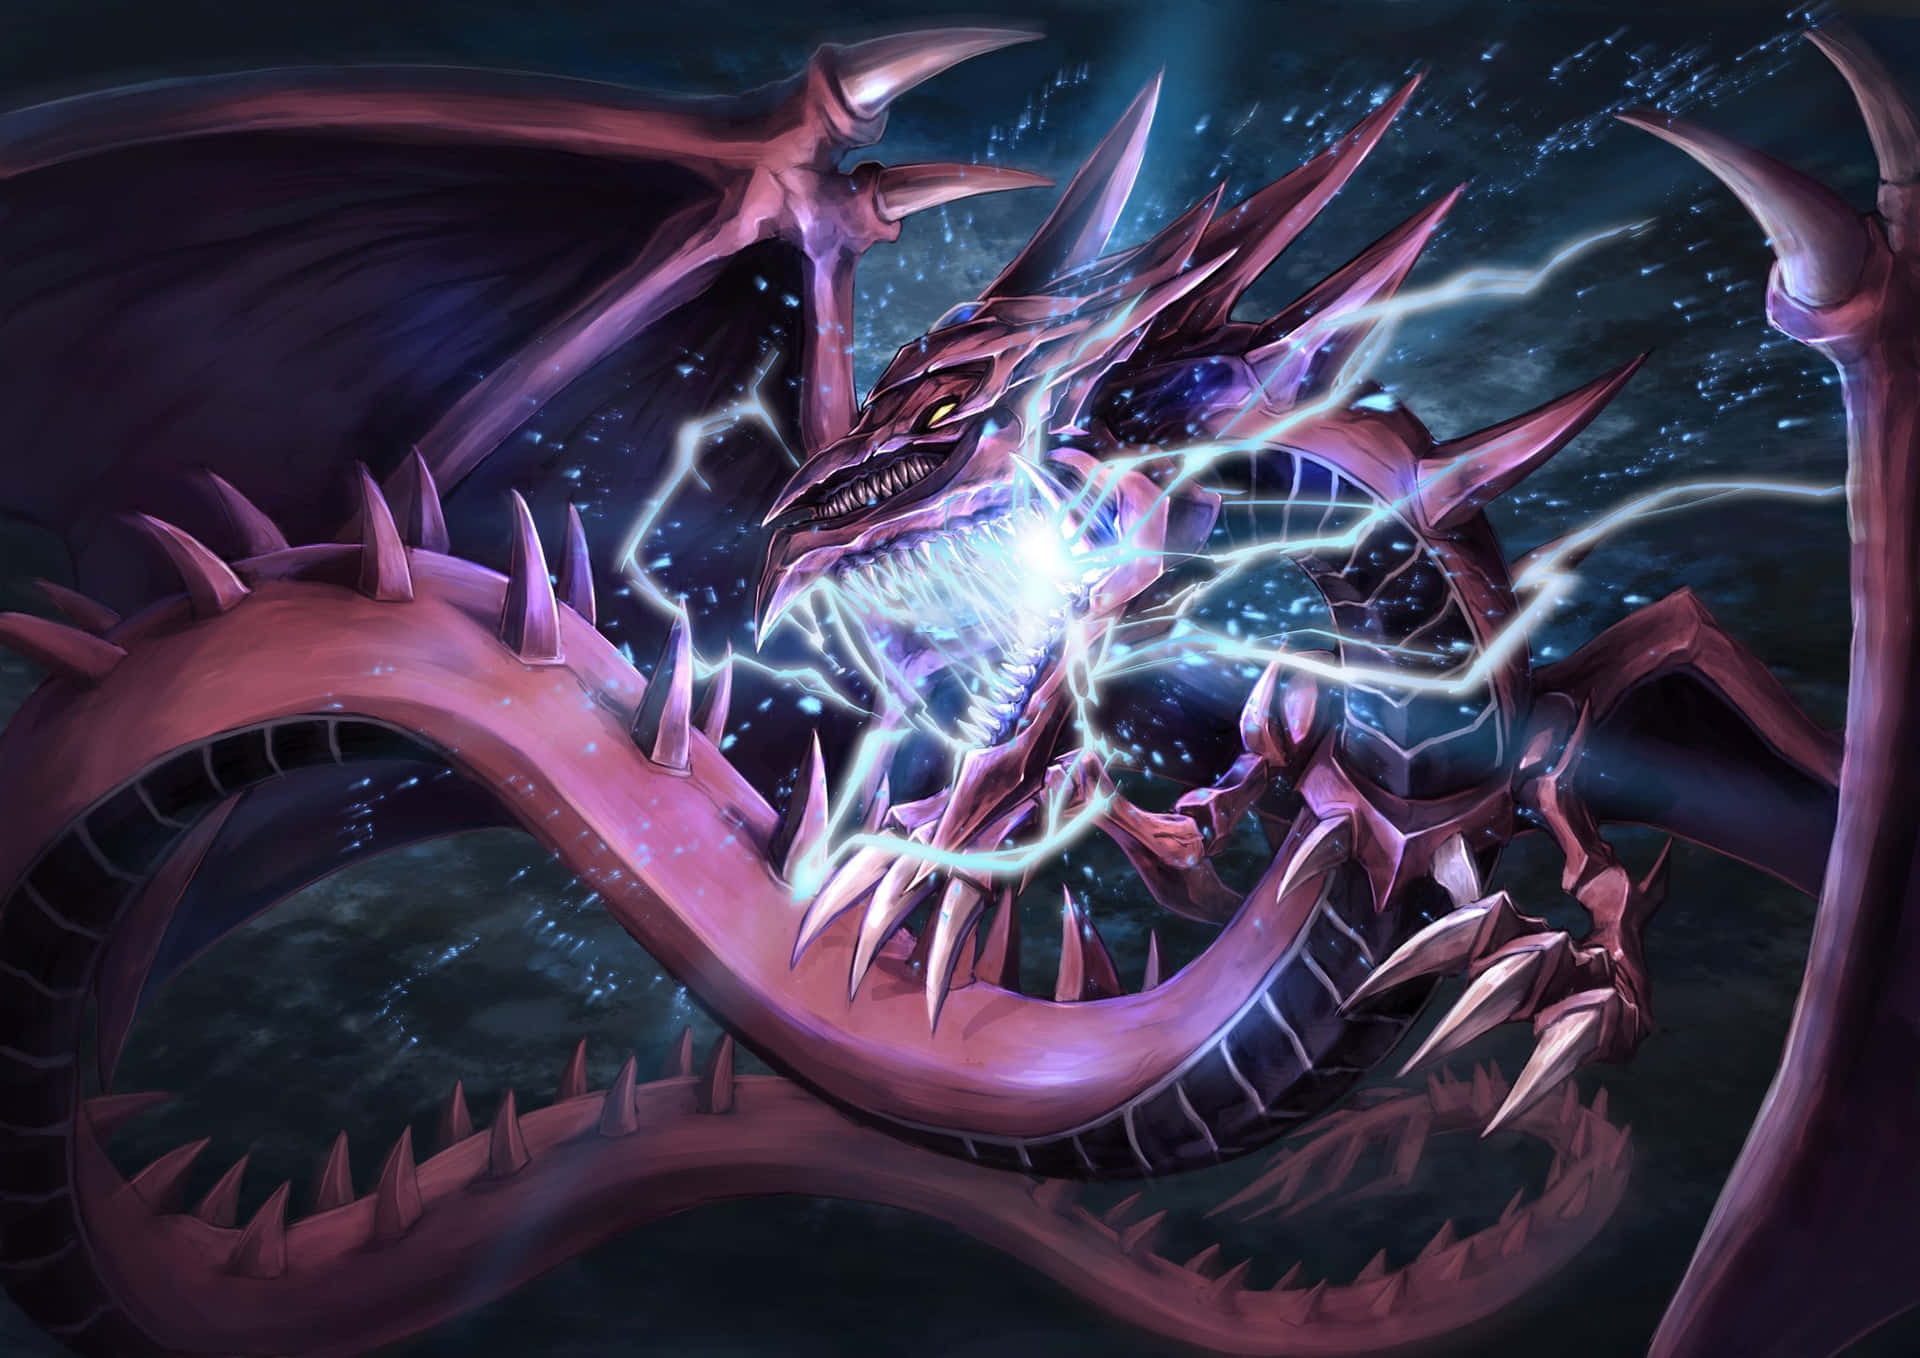 Mighty Yu-Gi-Oh! Dragons locked in an epic battle Wallpaper